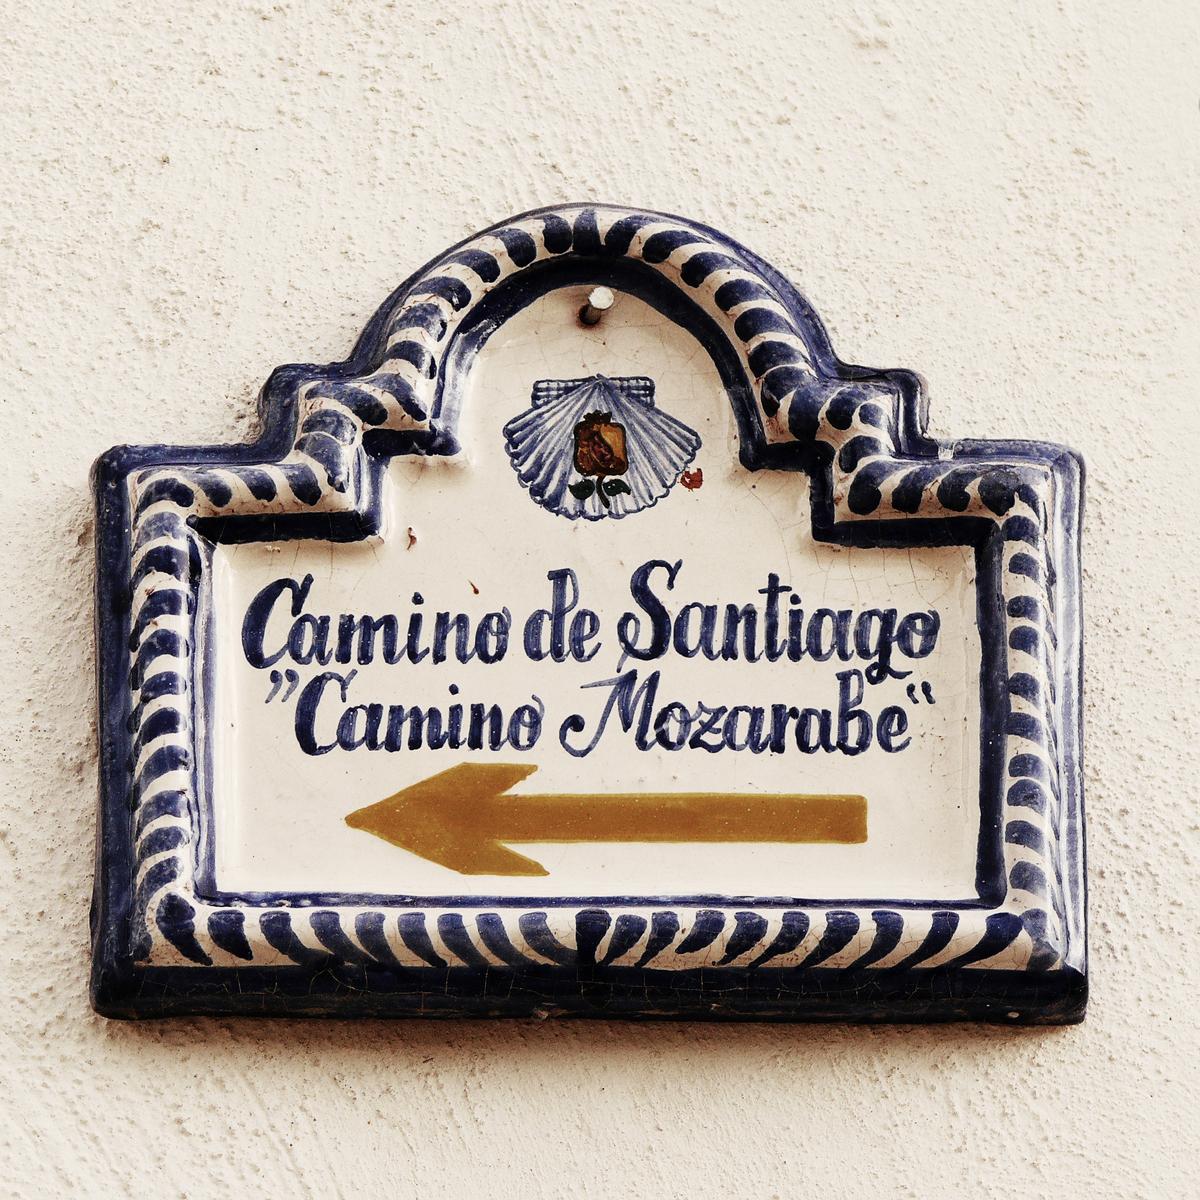 There is not just one camino, but many walking routes that lead to Santiago de Compostela. One of them, the Camino Mozárabe, starts in Andalusia, Spain. (Victor Ovies Arenas/Getty Images)